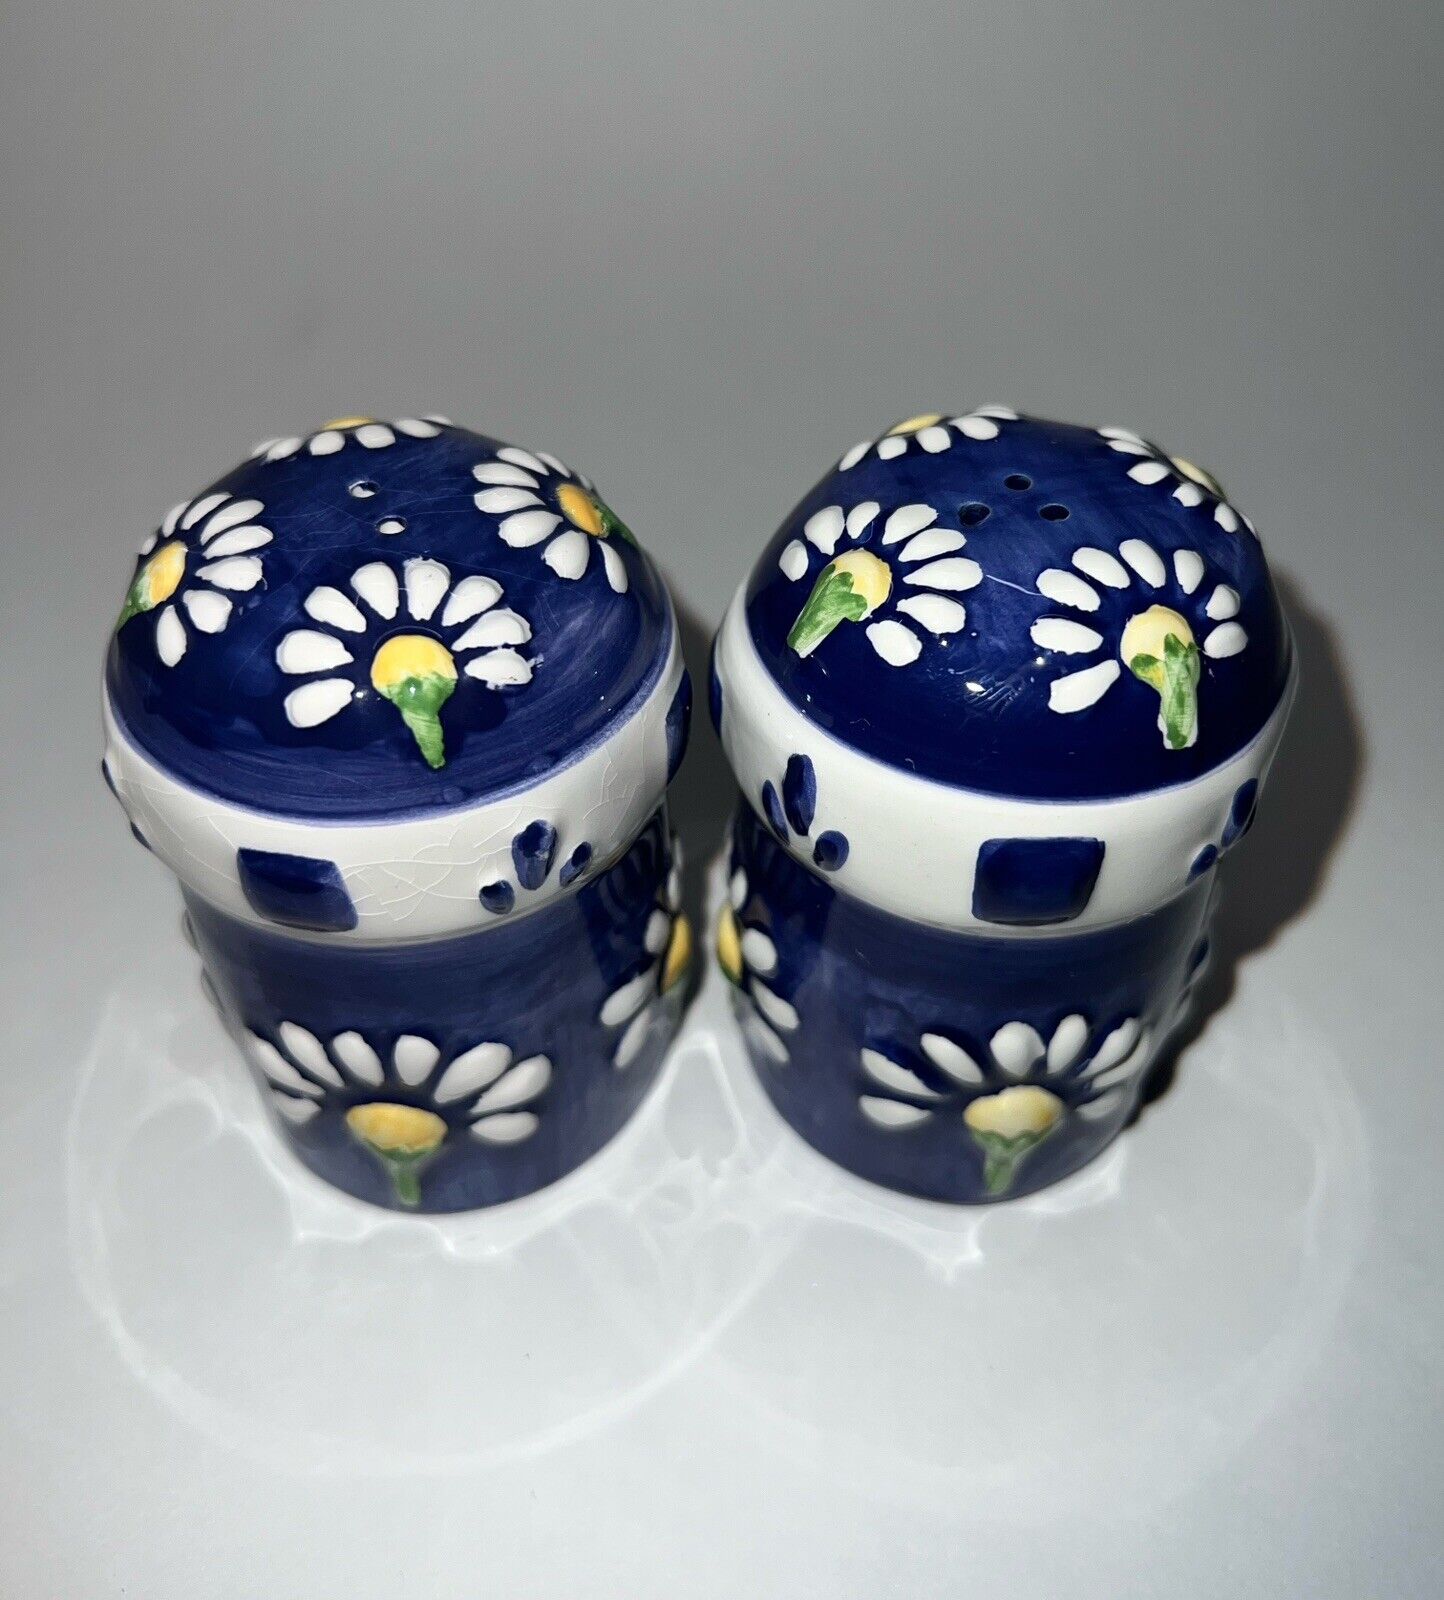 Discontinued Oneida Majesticware “Spring Daisy” Salt & Pepper Shakers New